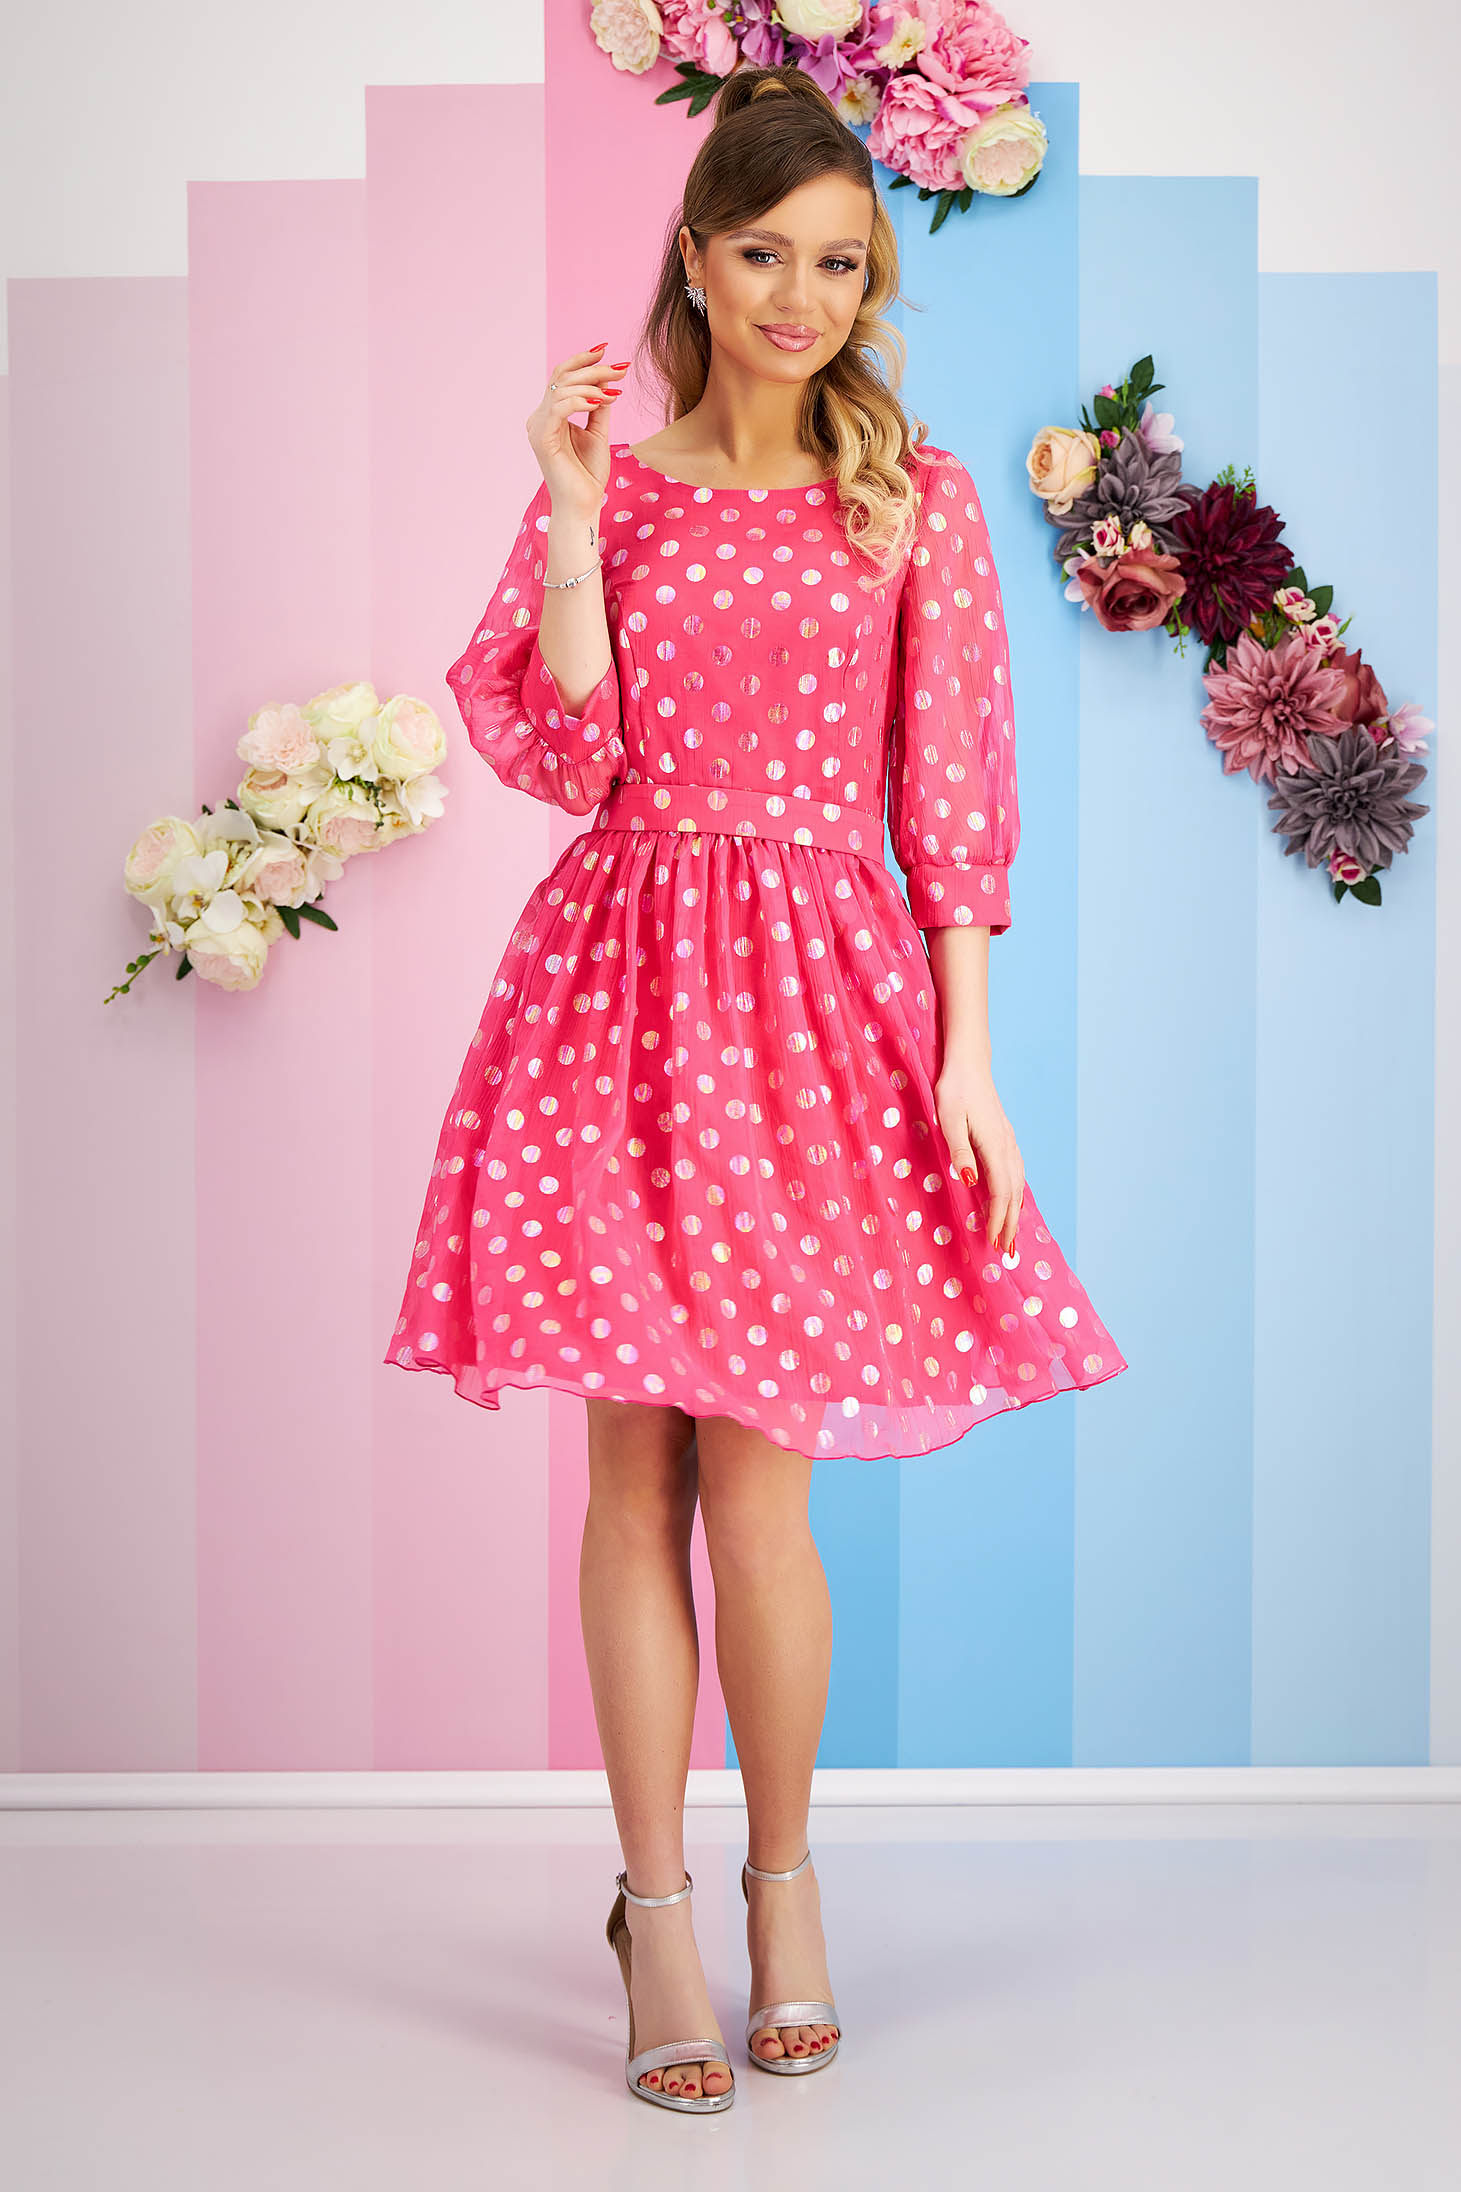 Fuchsia Veil Dress in A-line with Polka Dots Accessorized with Belt and Bow - StarShinerS 1 - StarShinerS.com